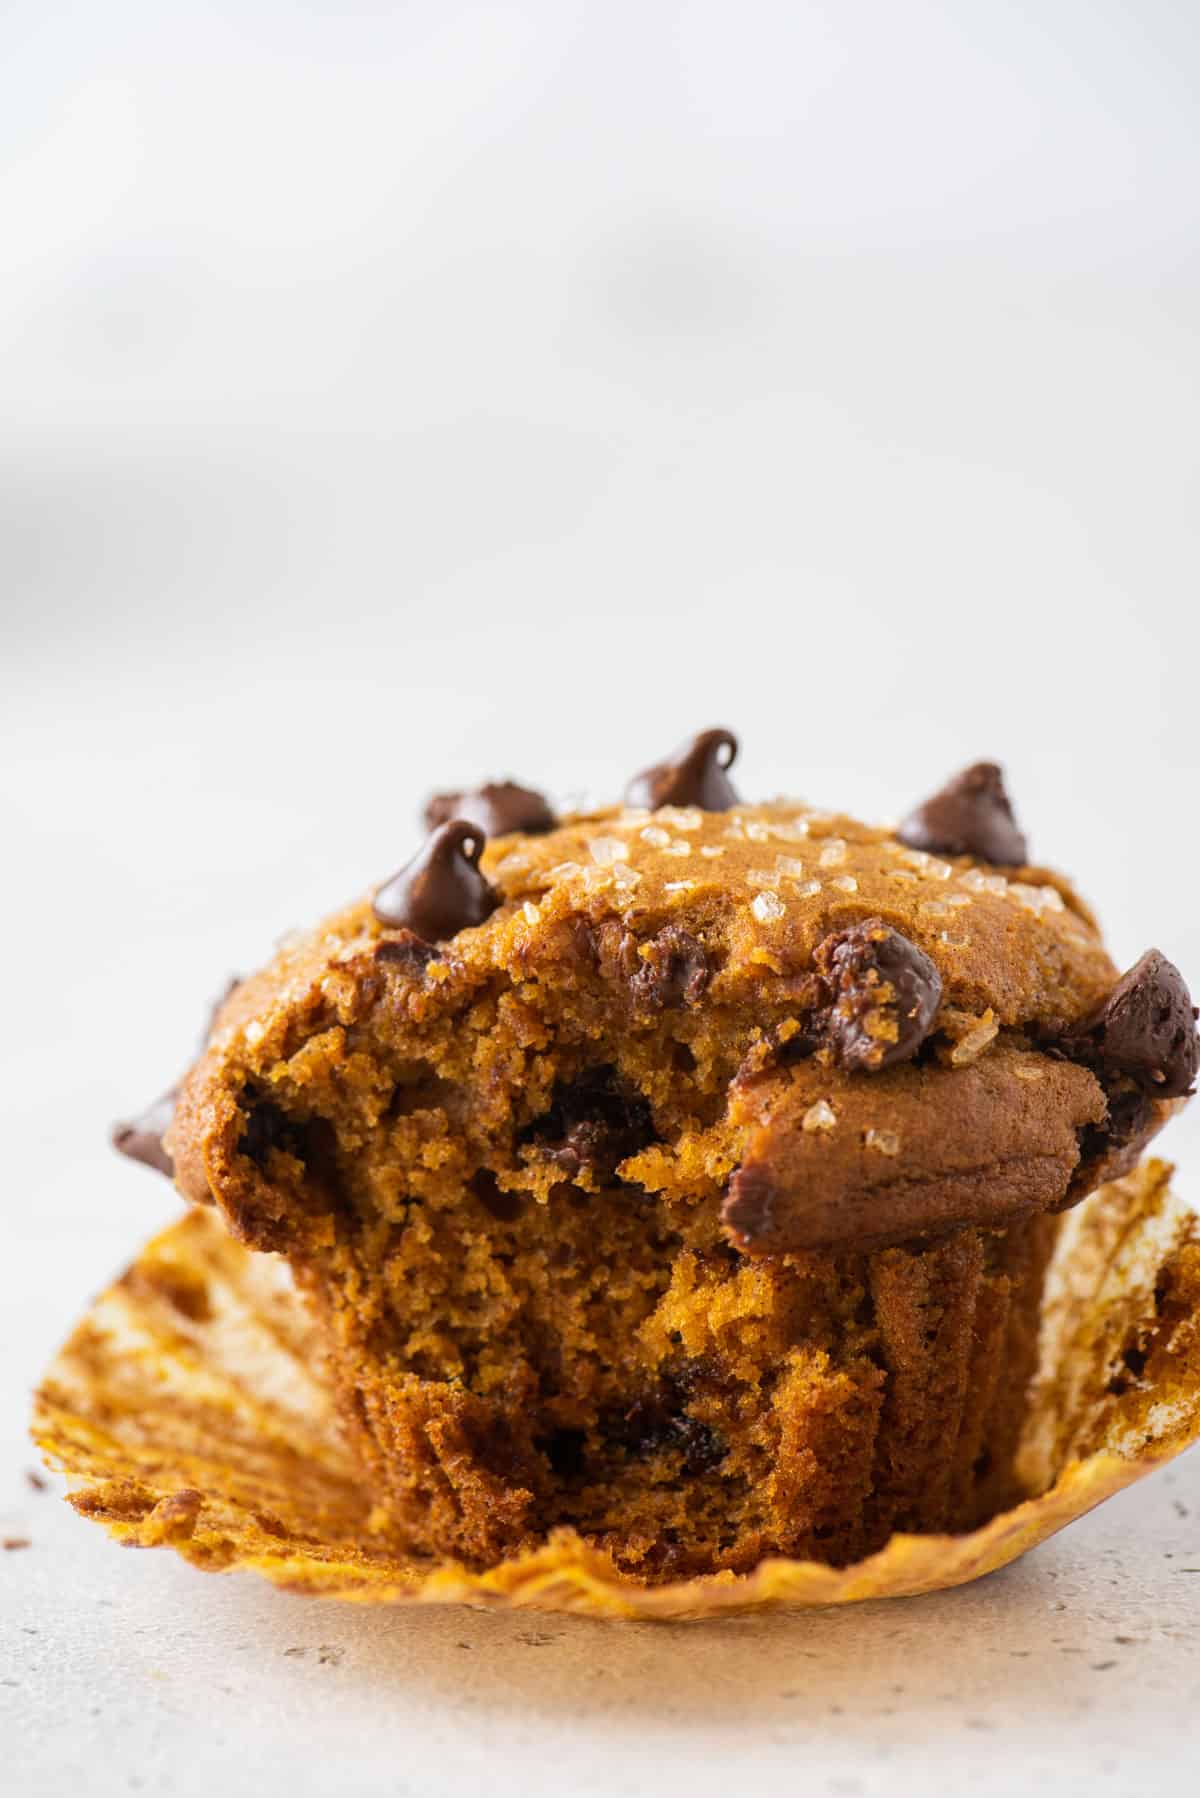 A pumpkin chocolate chip muffin, unwrapped, with one bite missing.